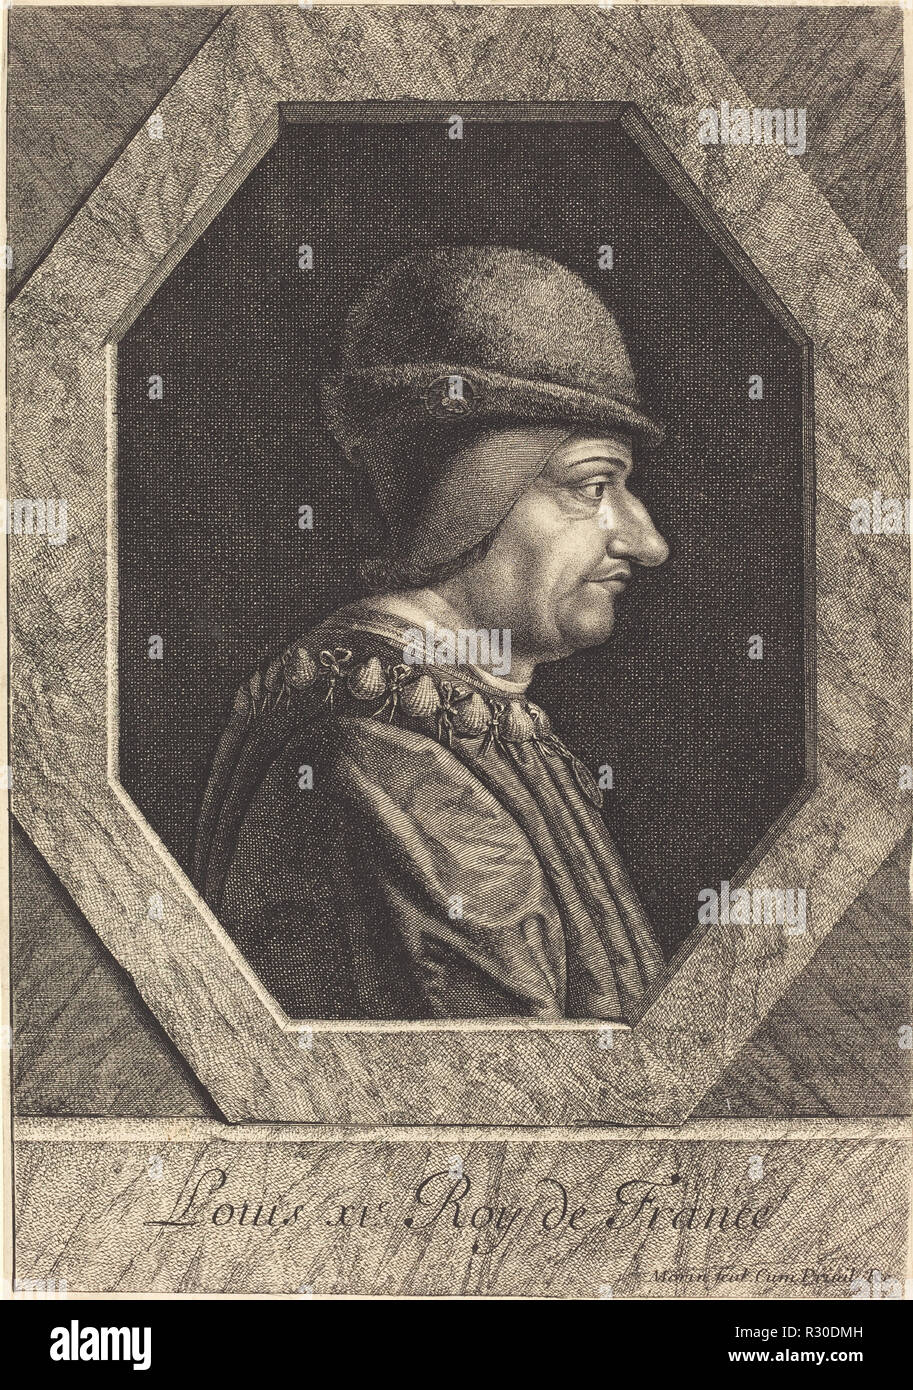 Louis XI. Dimensions: sheet (trimmed to plate mark): 30.6 x 21.4 cm (12 1/16 x 8 7/16 in.). Medium: etching, engraving, and stippling on laid paper. Museum: National Gallery of Art, Washington DC. Author: Jean Morin. Stock Photo